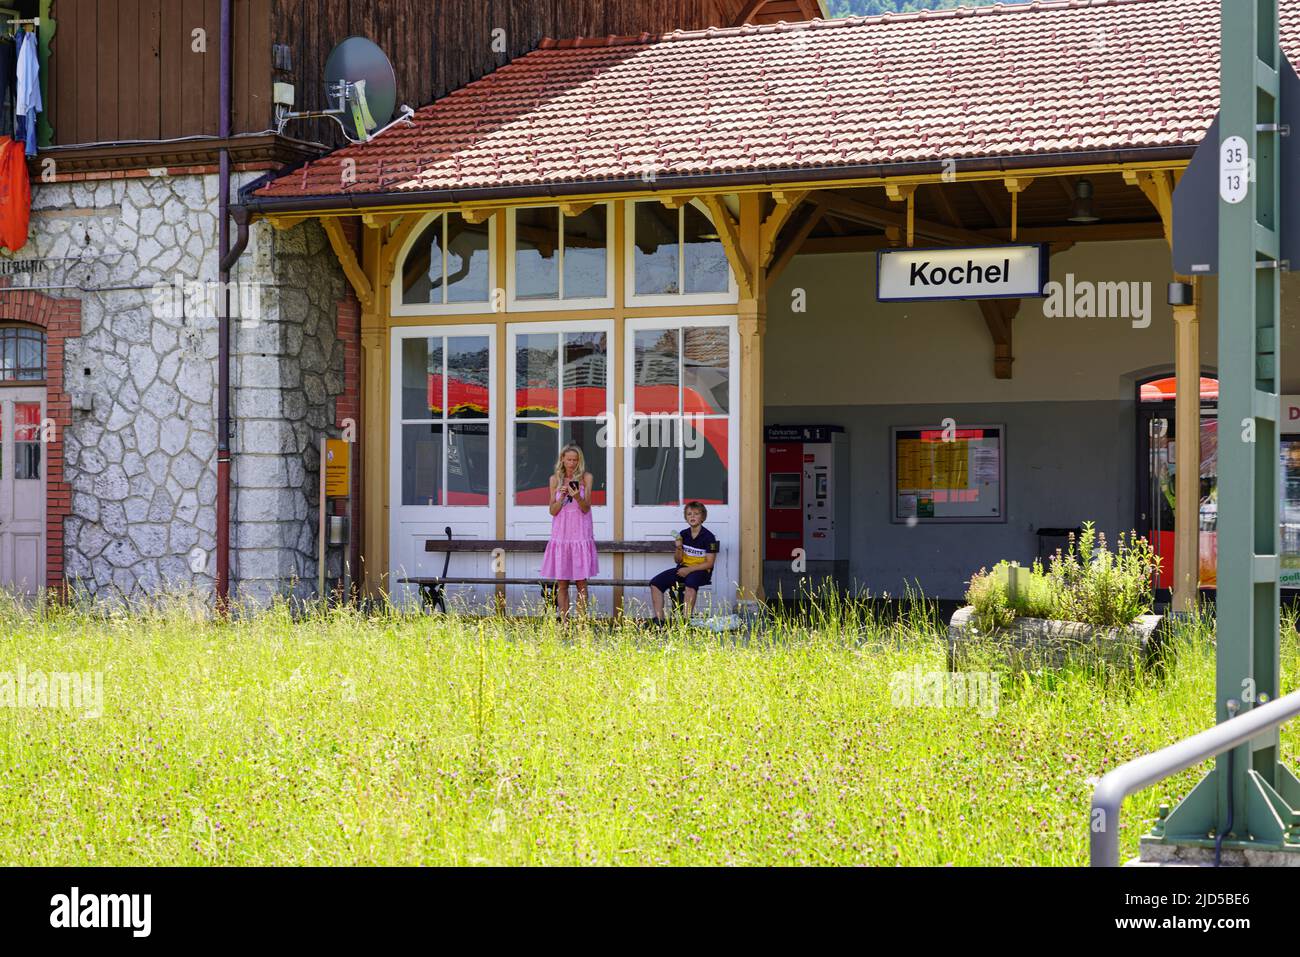 A woman and a child wait in the outside waiting area at the Bavarian railway station in Kochel, Bavaria, Germany, 18.6.22 Stock Photo